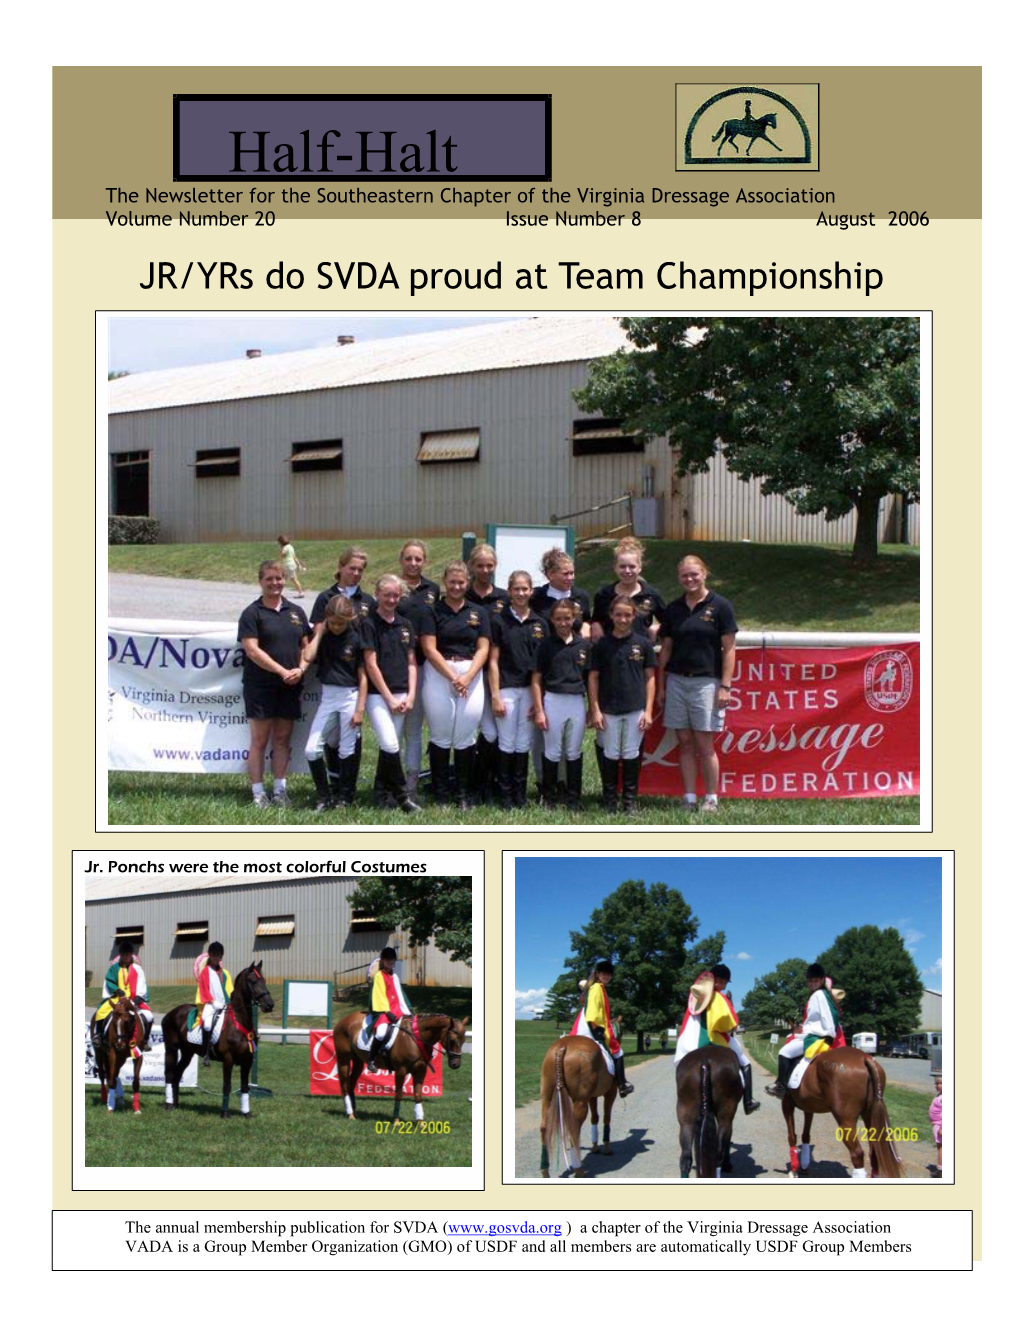 Half-Halt the Newsletter for the Southeastern Chapter of the Virginia Dressage Association Volume Number 20 Issue Number 8 August 2006